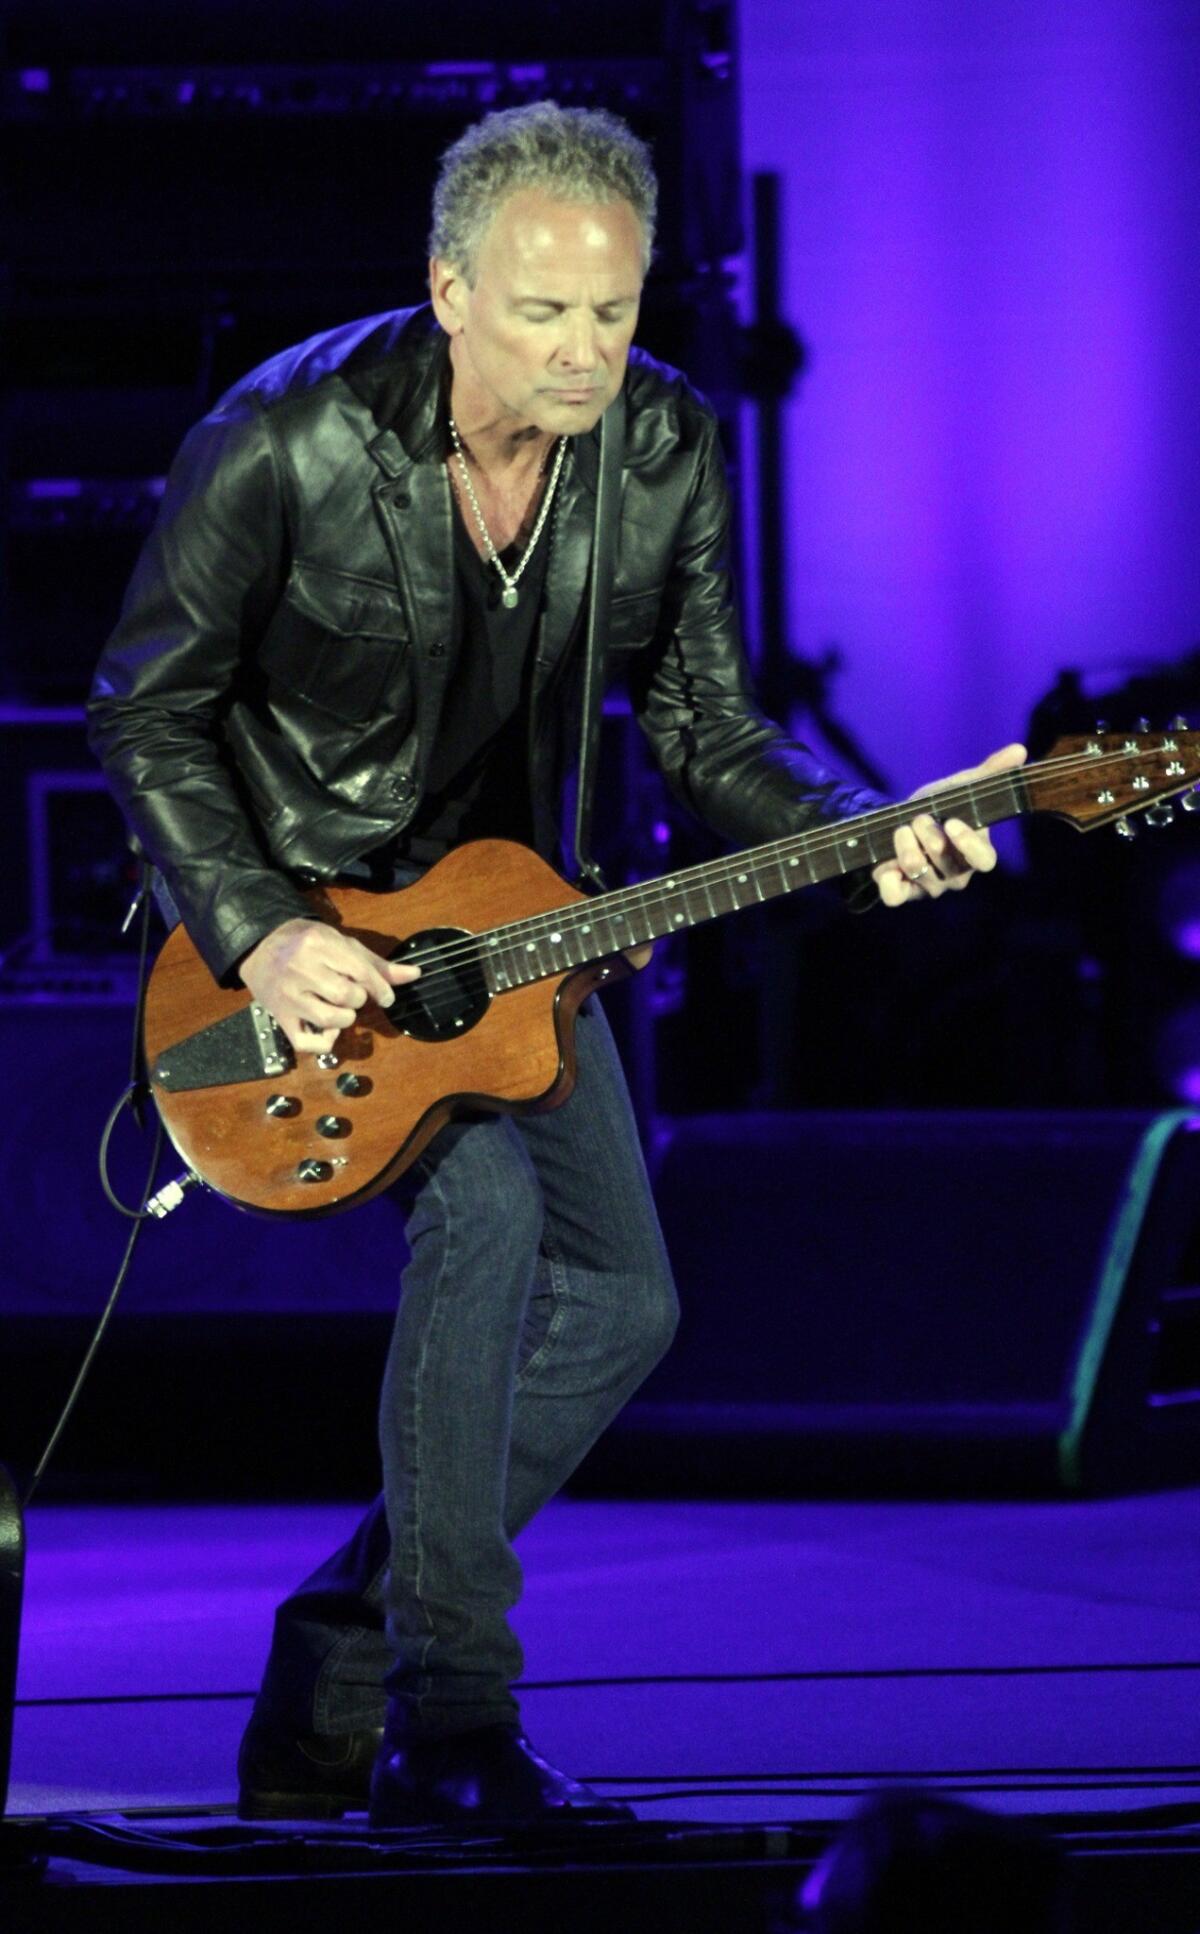 Lindsey Buckingham of Fleetwood Mac at their concert at the Hollywood Bowl in May of 2013.